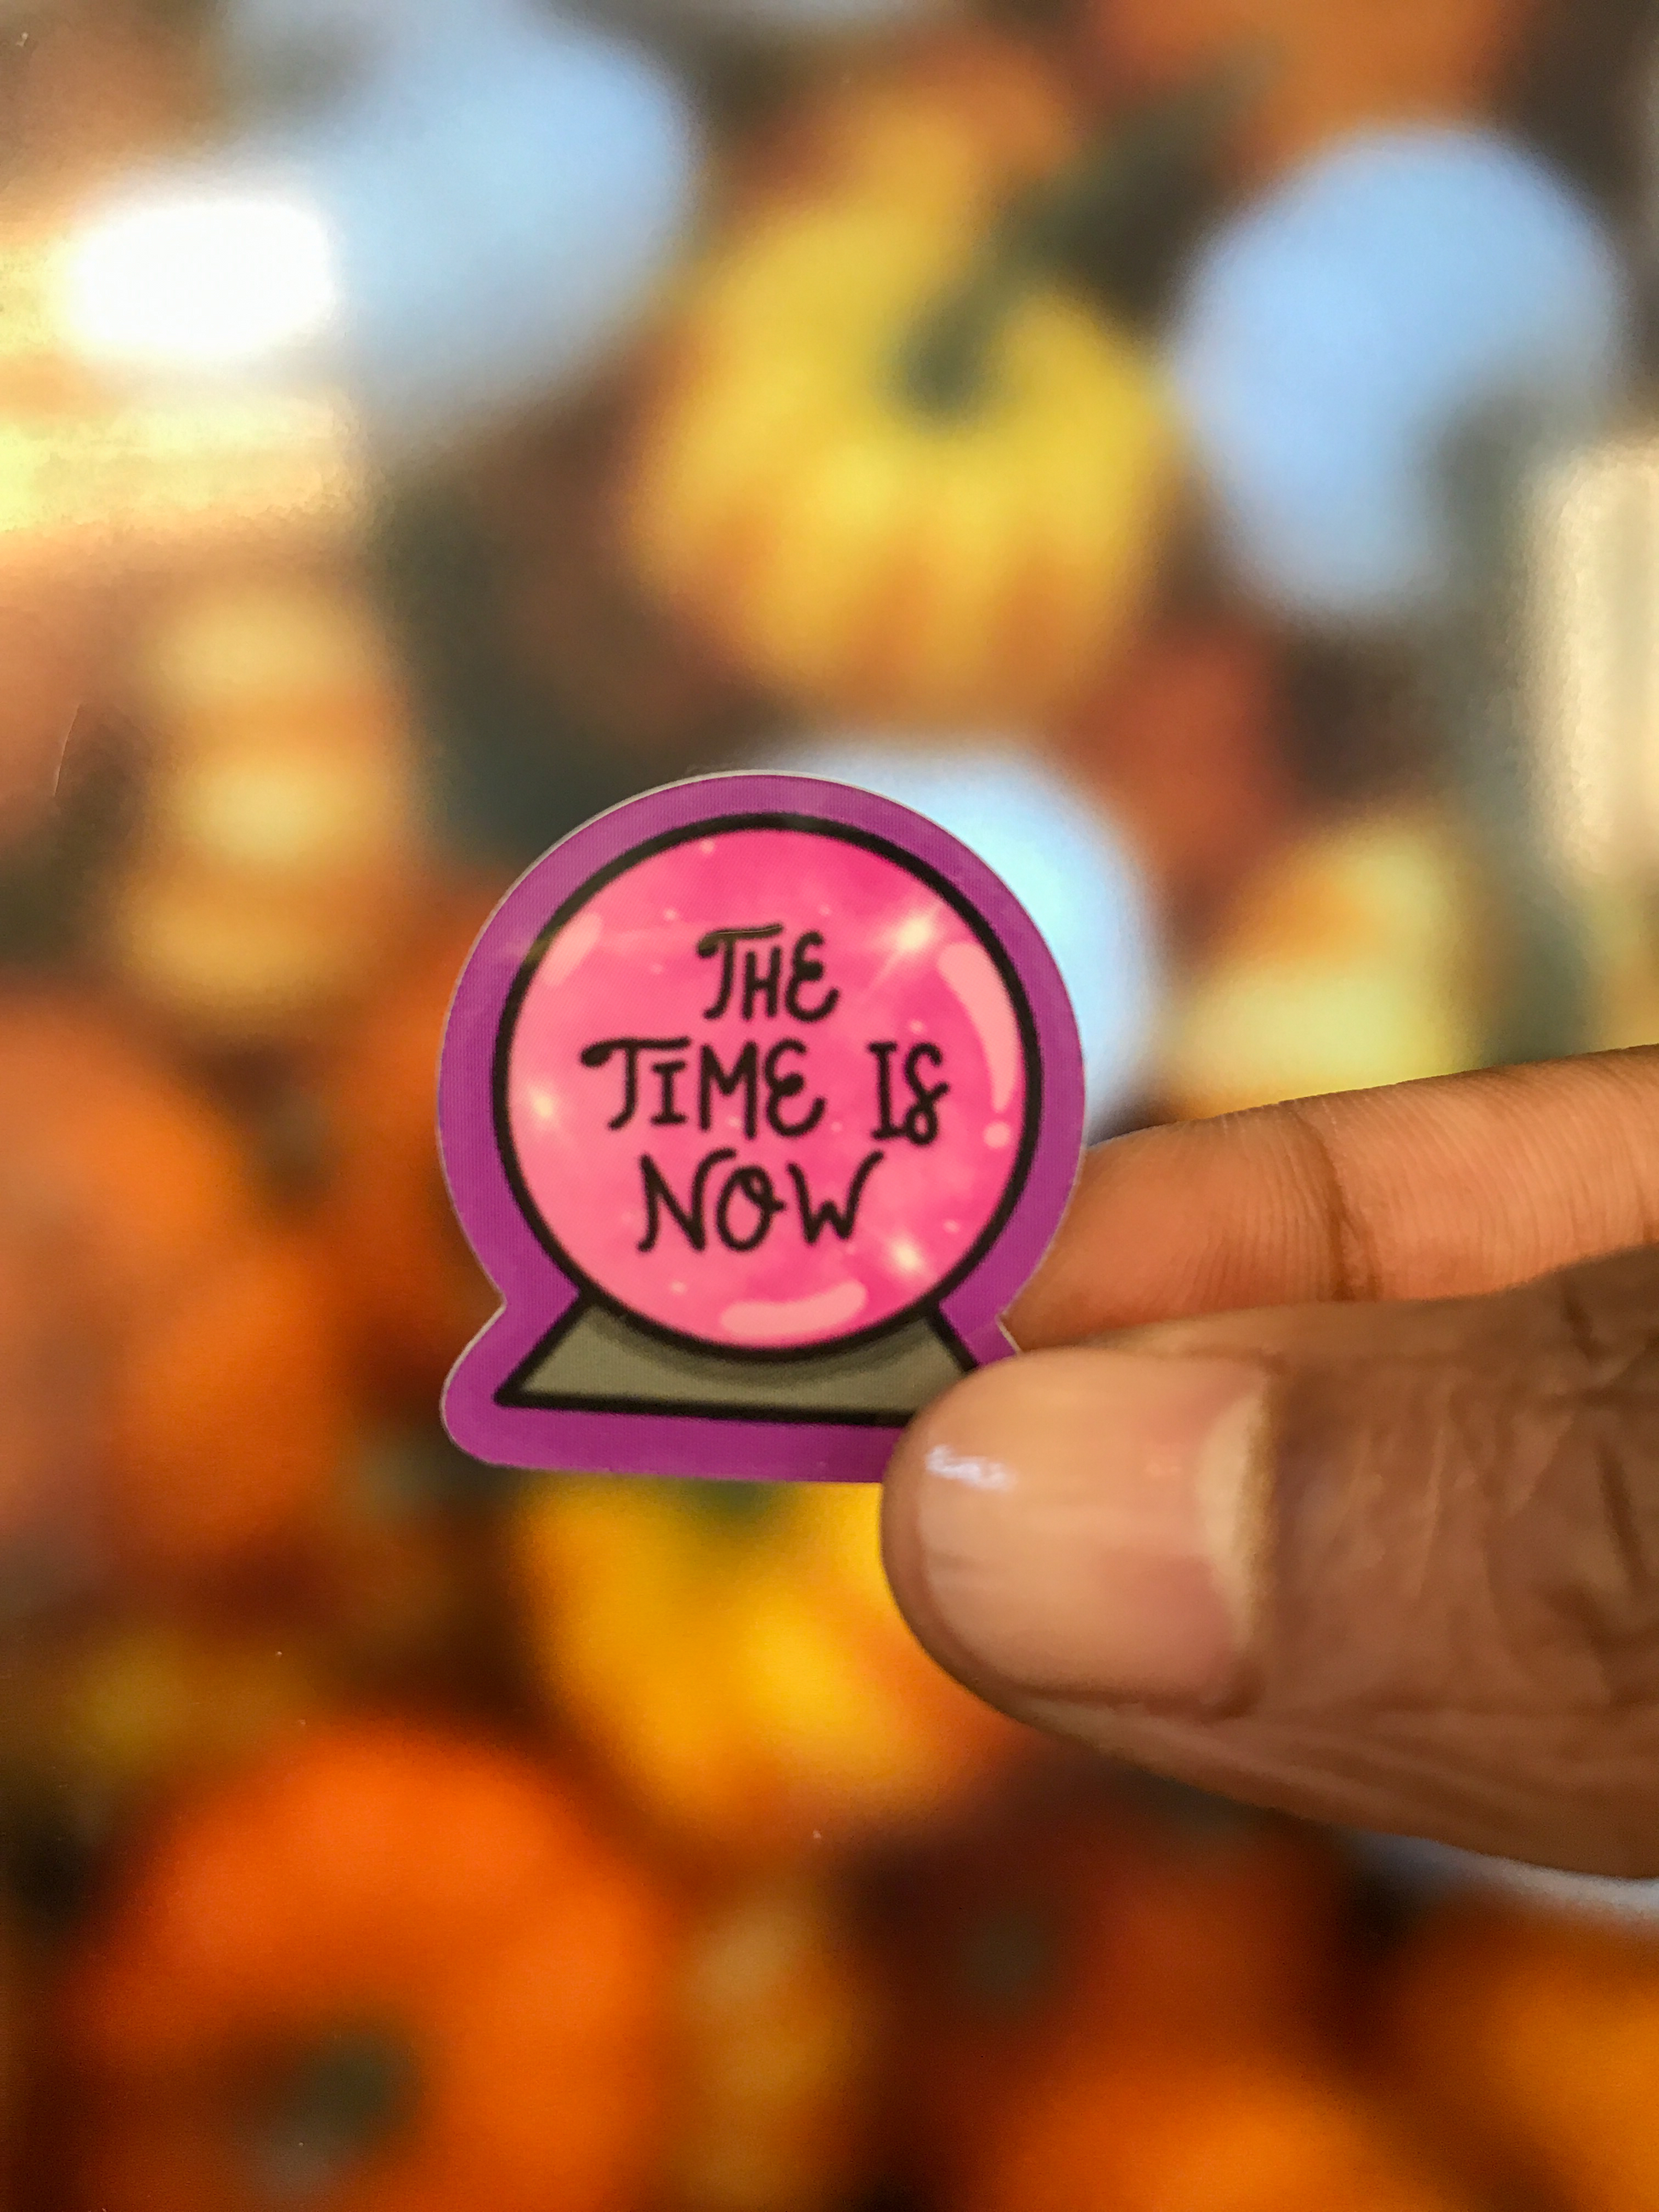 Crystal Ball sticker that reads "The Time Is Now"